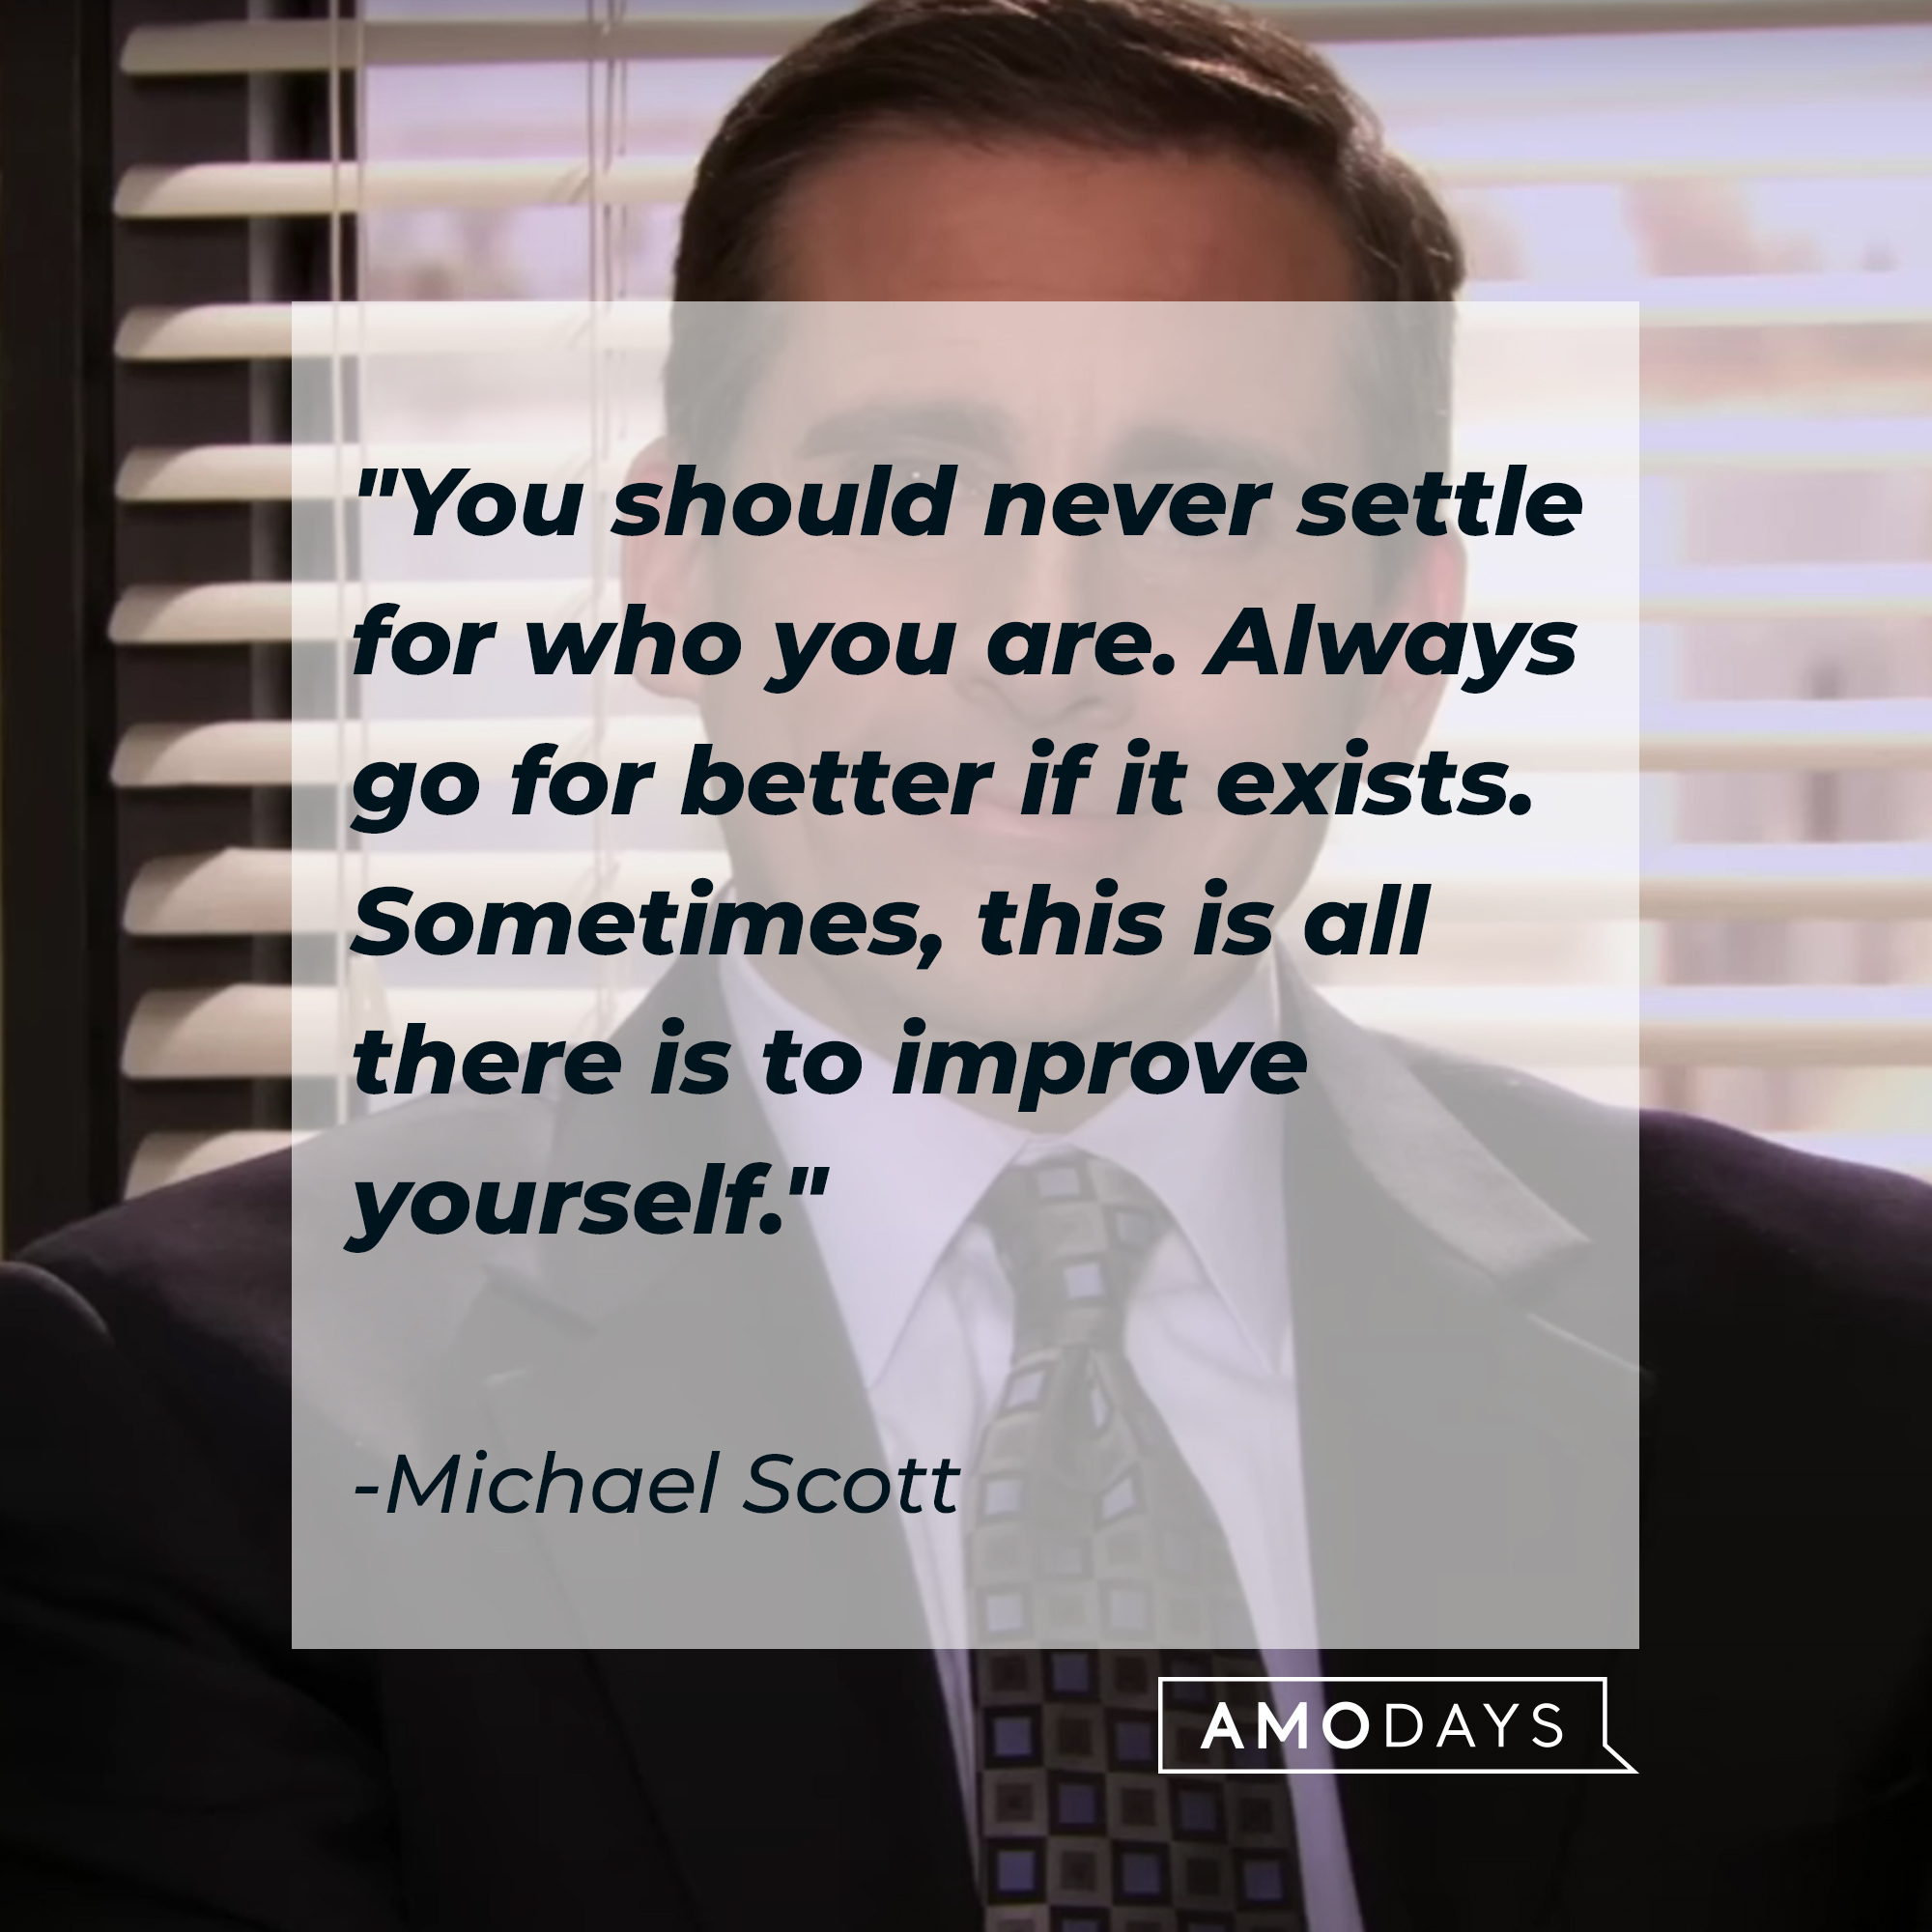 Michael Scott's quote: "You should never settle for who you are. Always go for better if it exists. Sometimes, this is all there is to improve yourself." | Source: YouTube/TheOffice